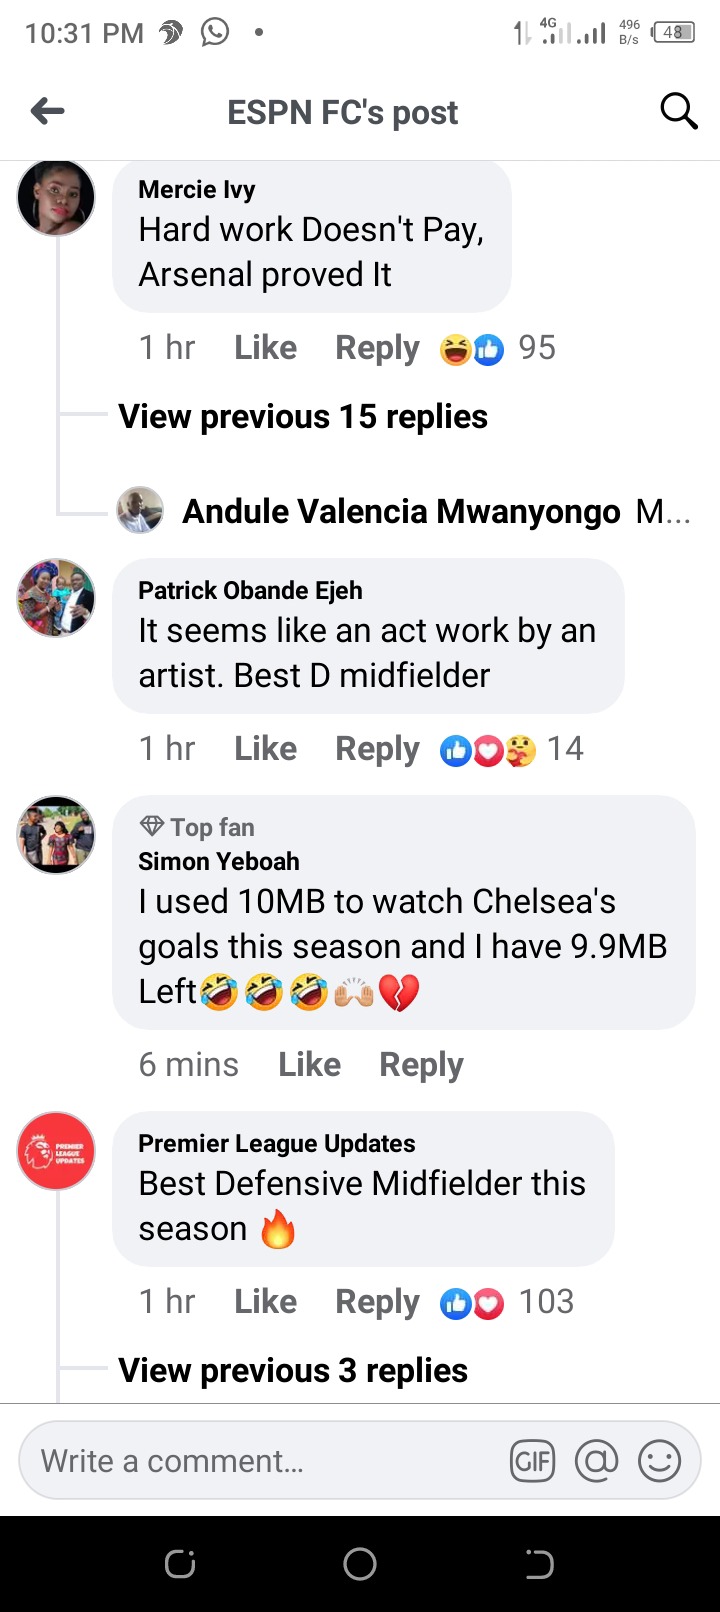 What fans are saying about Casemiro's defense splitting no look pass against Chelsea Football Club